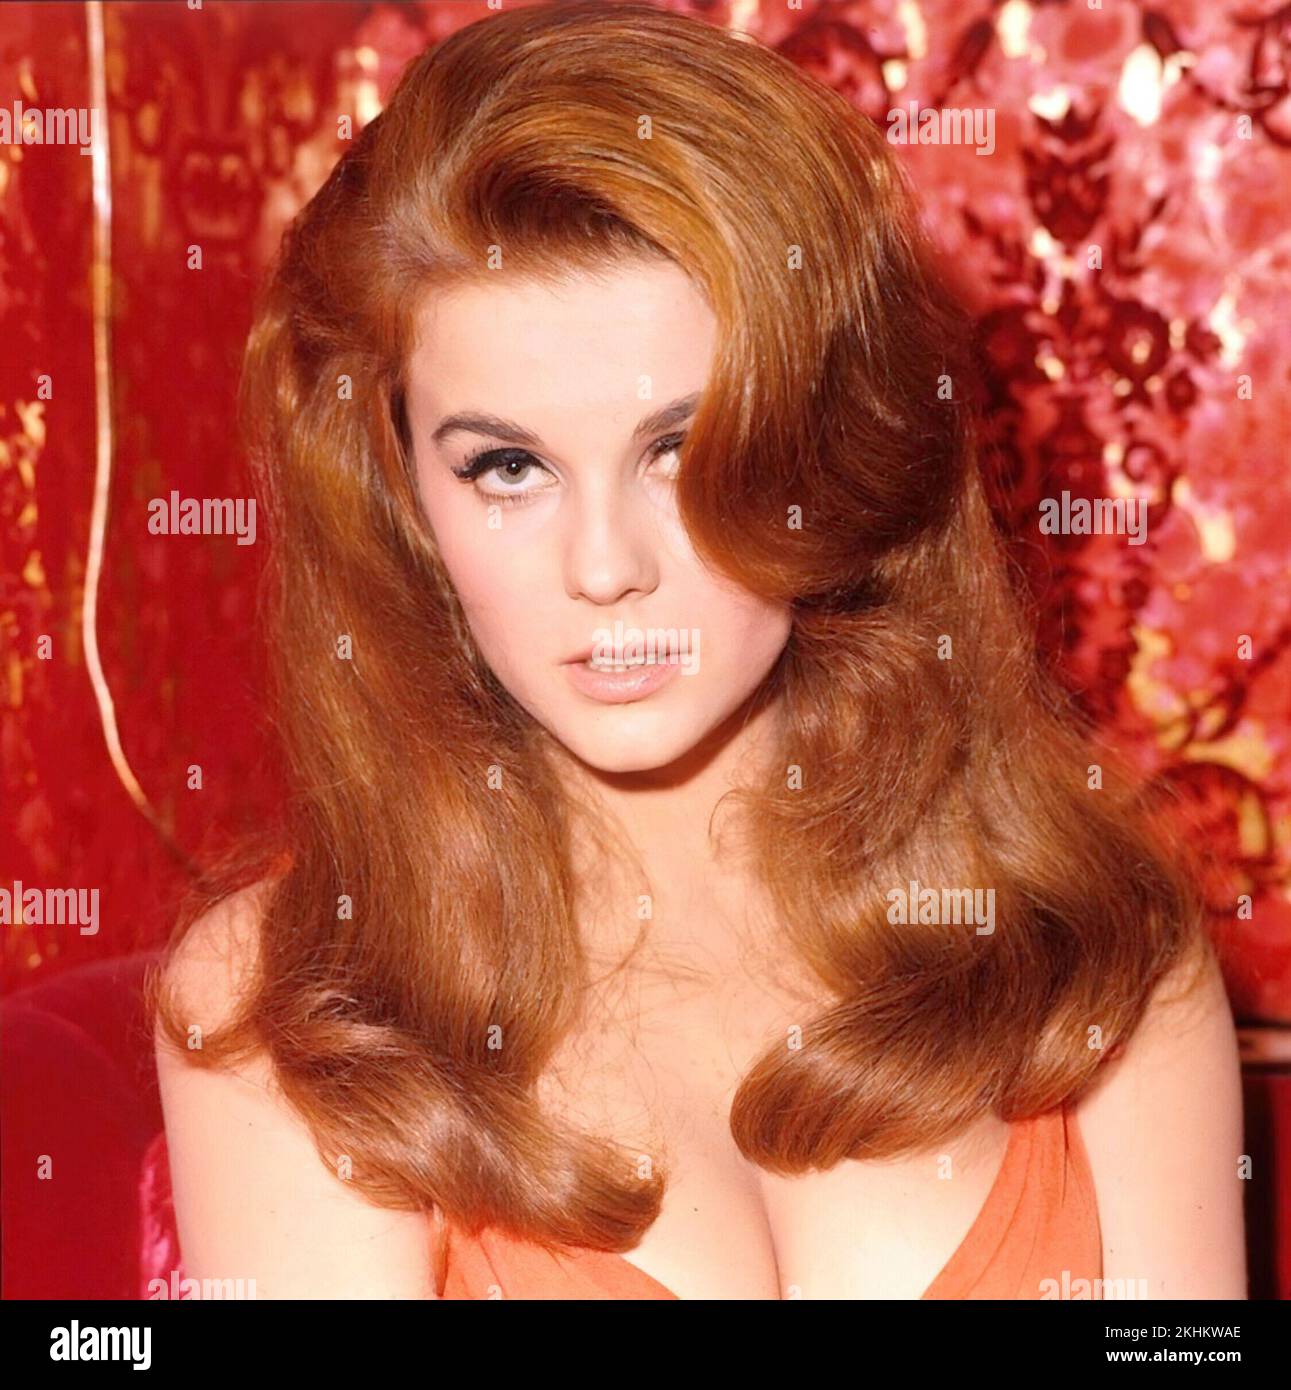 ANN-MARGRET in THE SWINGER (1966), directed by GEORGE SIDNEY. Credit: PARAMOUNT PICTURES / Album Stock Photo